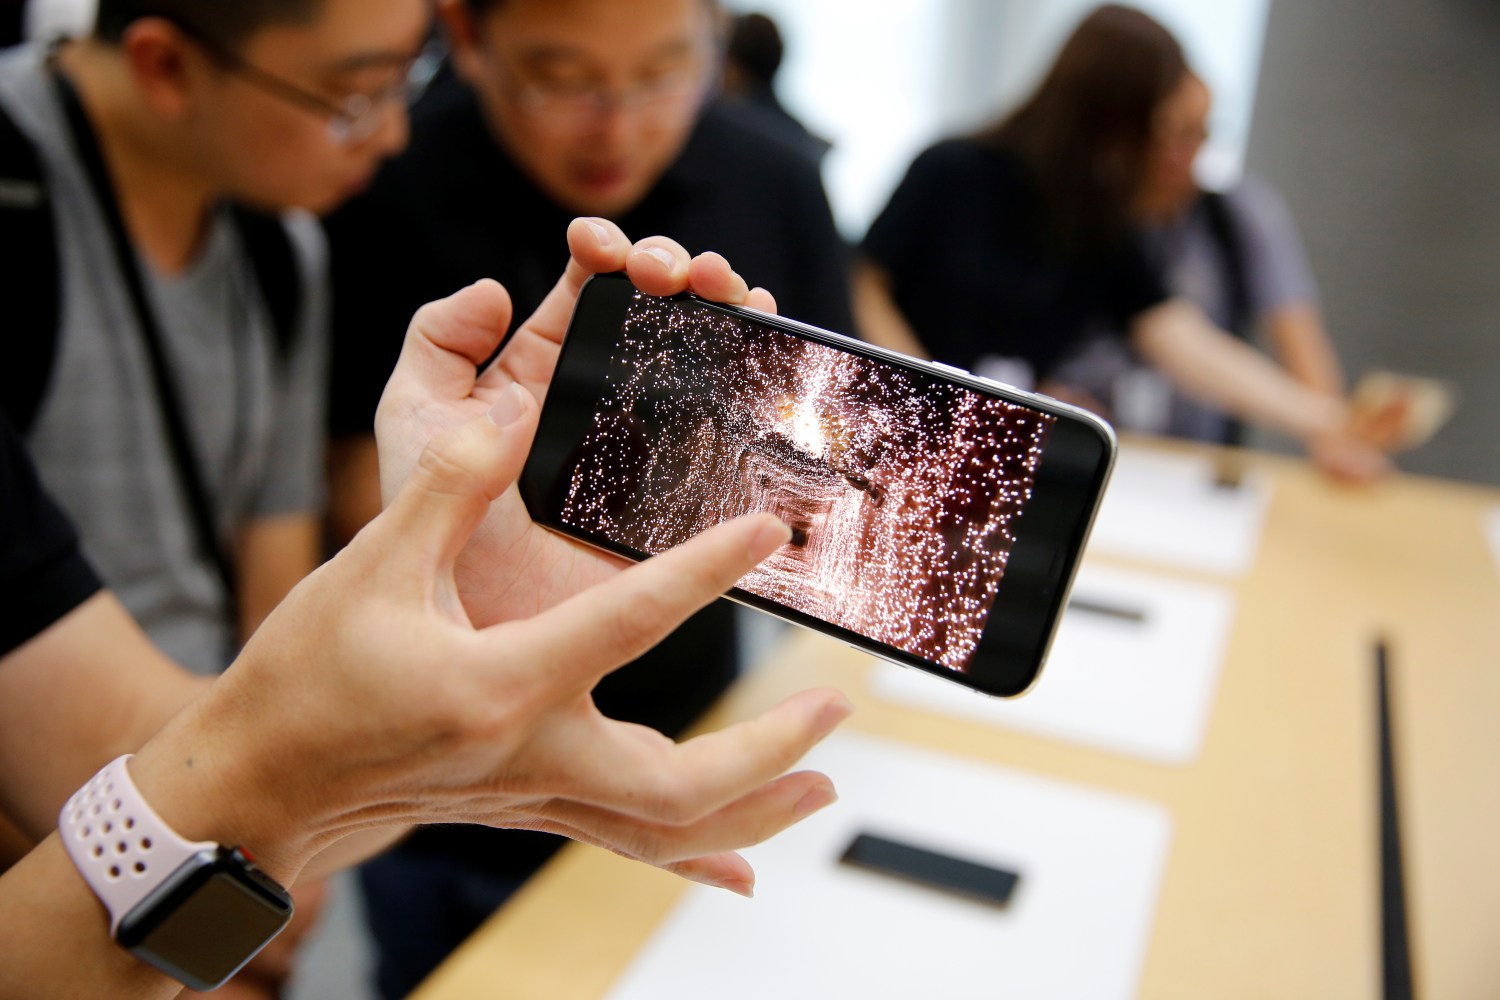 People handle the new Apple iPhone XS and iPhone XS Max during a media tour at an Apple office in Shanghai, China, September 21, 2018.  REUTERS/Aly Song - RC1C7A5795F0